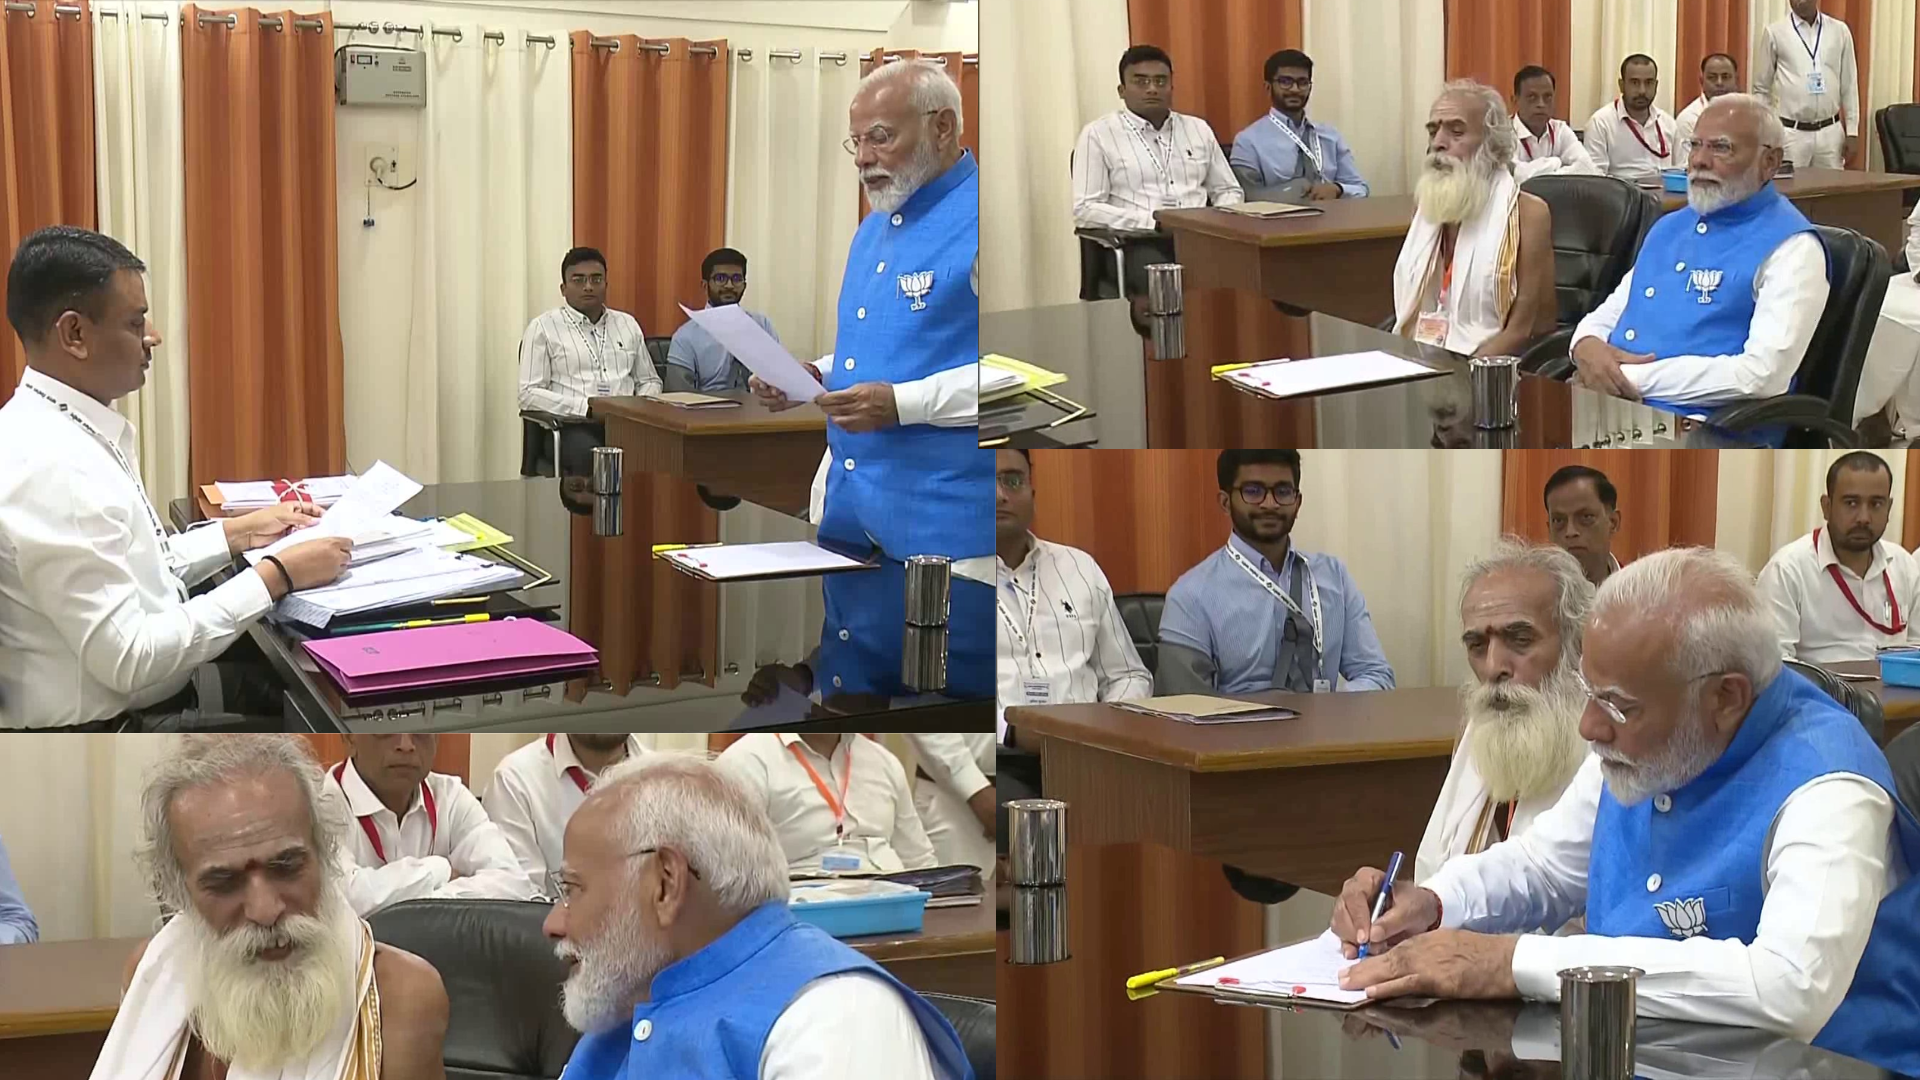 Prime Minister Narendra Modi Submits Nomination In Varanasi Following Visit to Historic Ghat And Temple